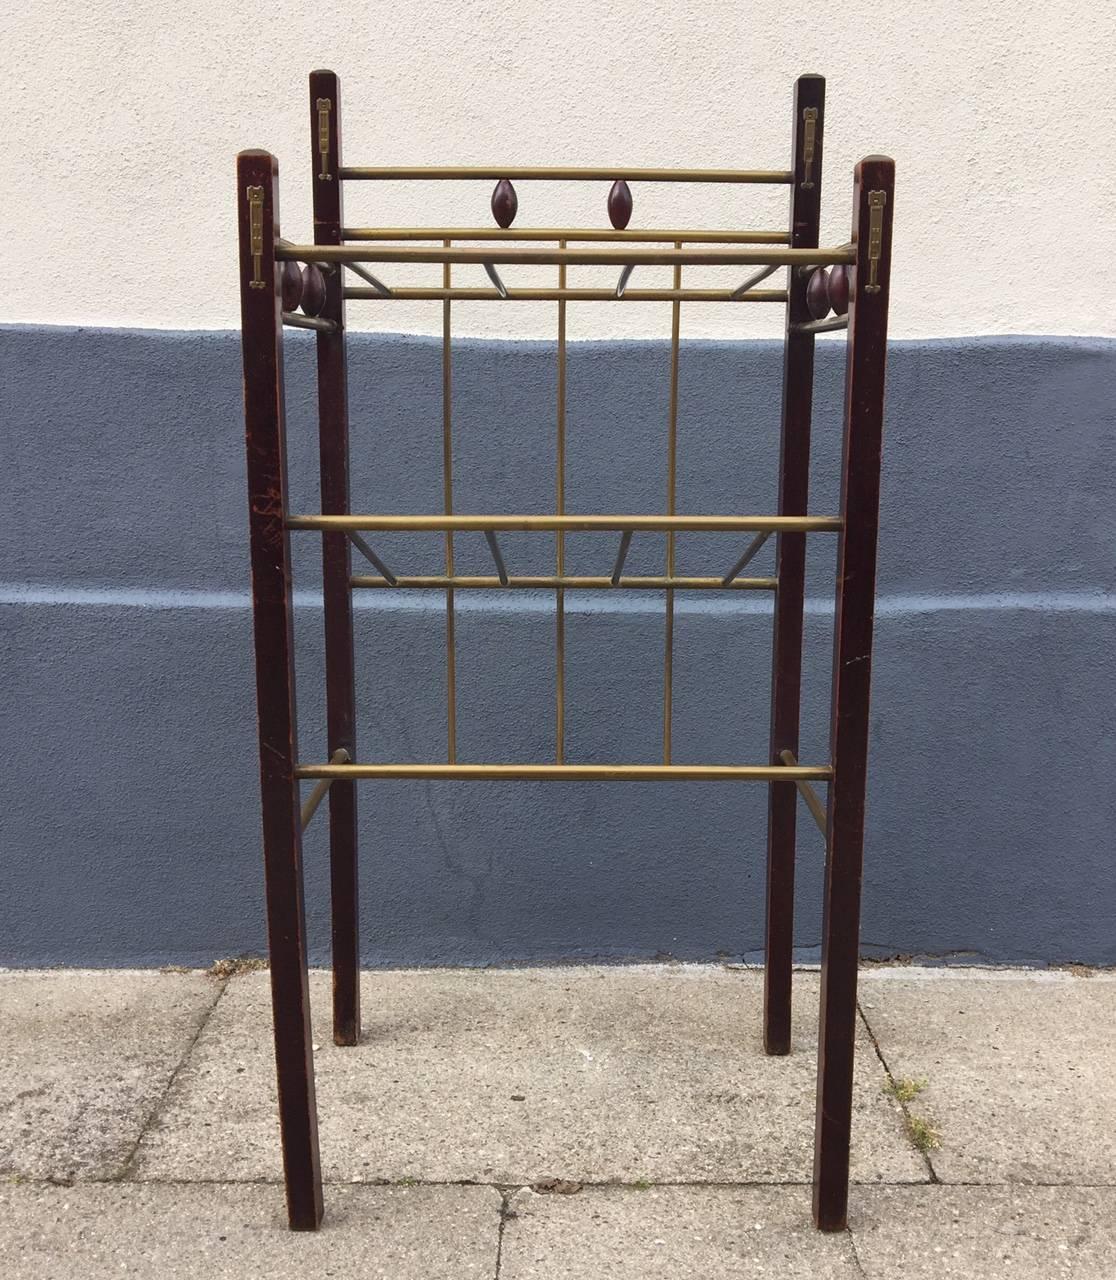 This Secessionist magazine, shoe or sheet music rack or shelf was made in Vienna, Austria during the early 1900s by an anonymous craftsman in the style of Koloman Moser. It is made from stained wood and brass.